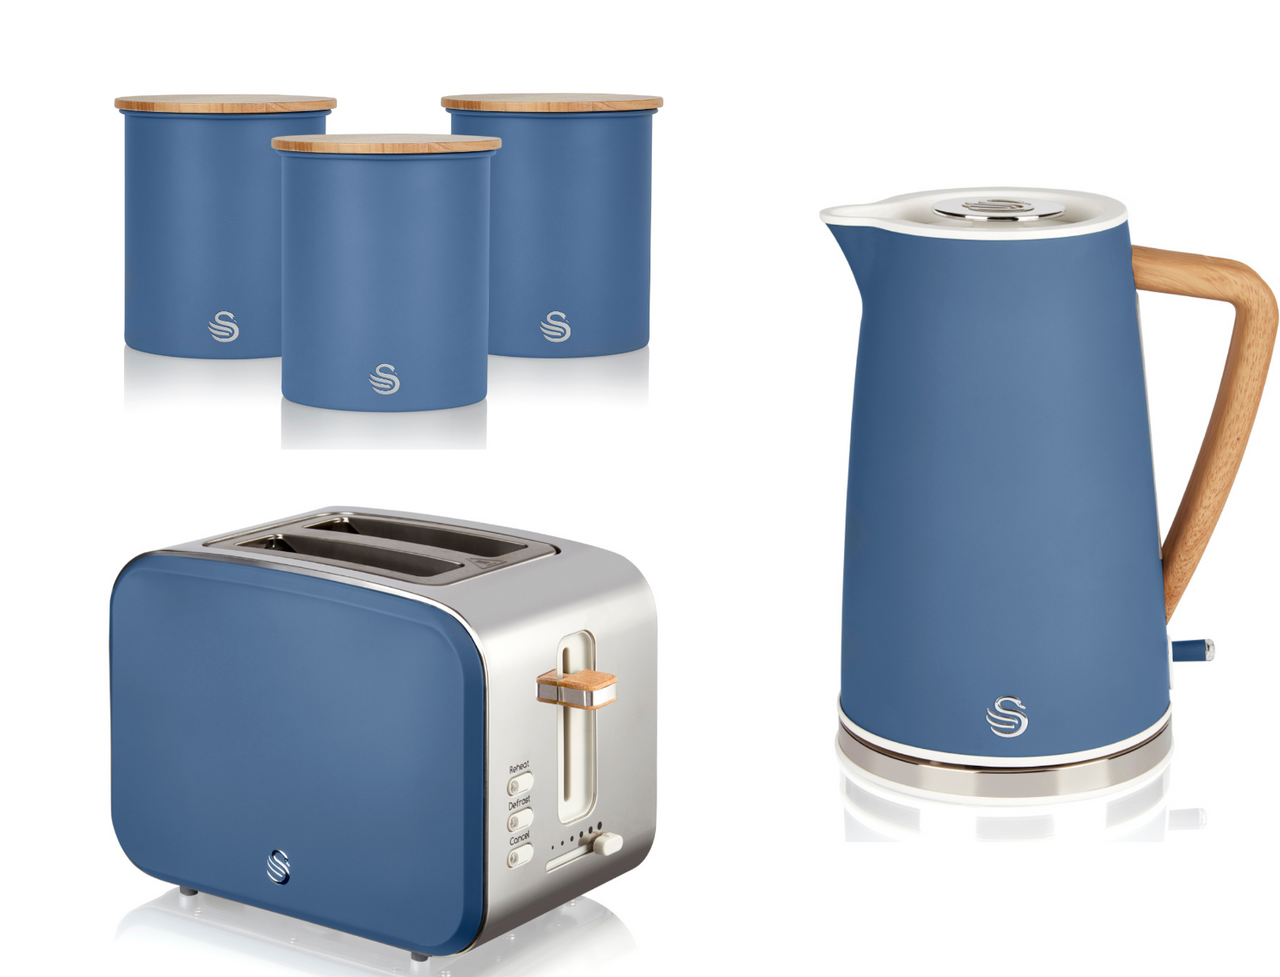 Swan Nordic Kettle 2 Slice Toaster & 3 Canisters Matching Kitchen Set in Blue